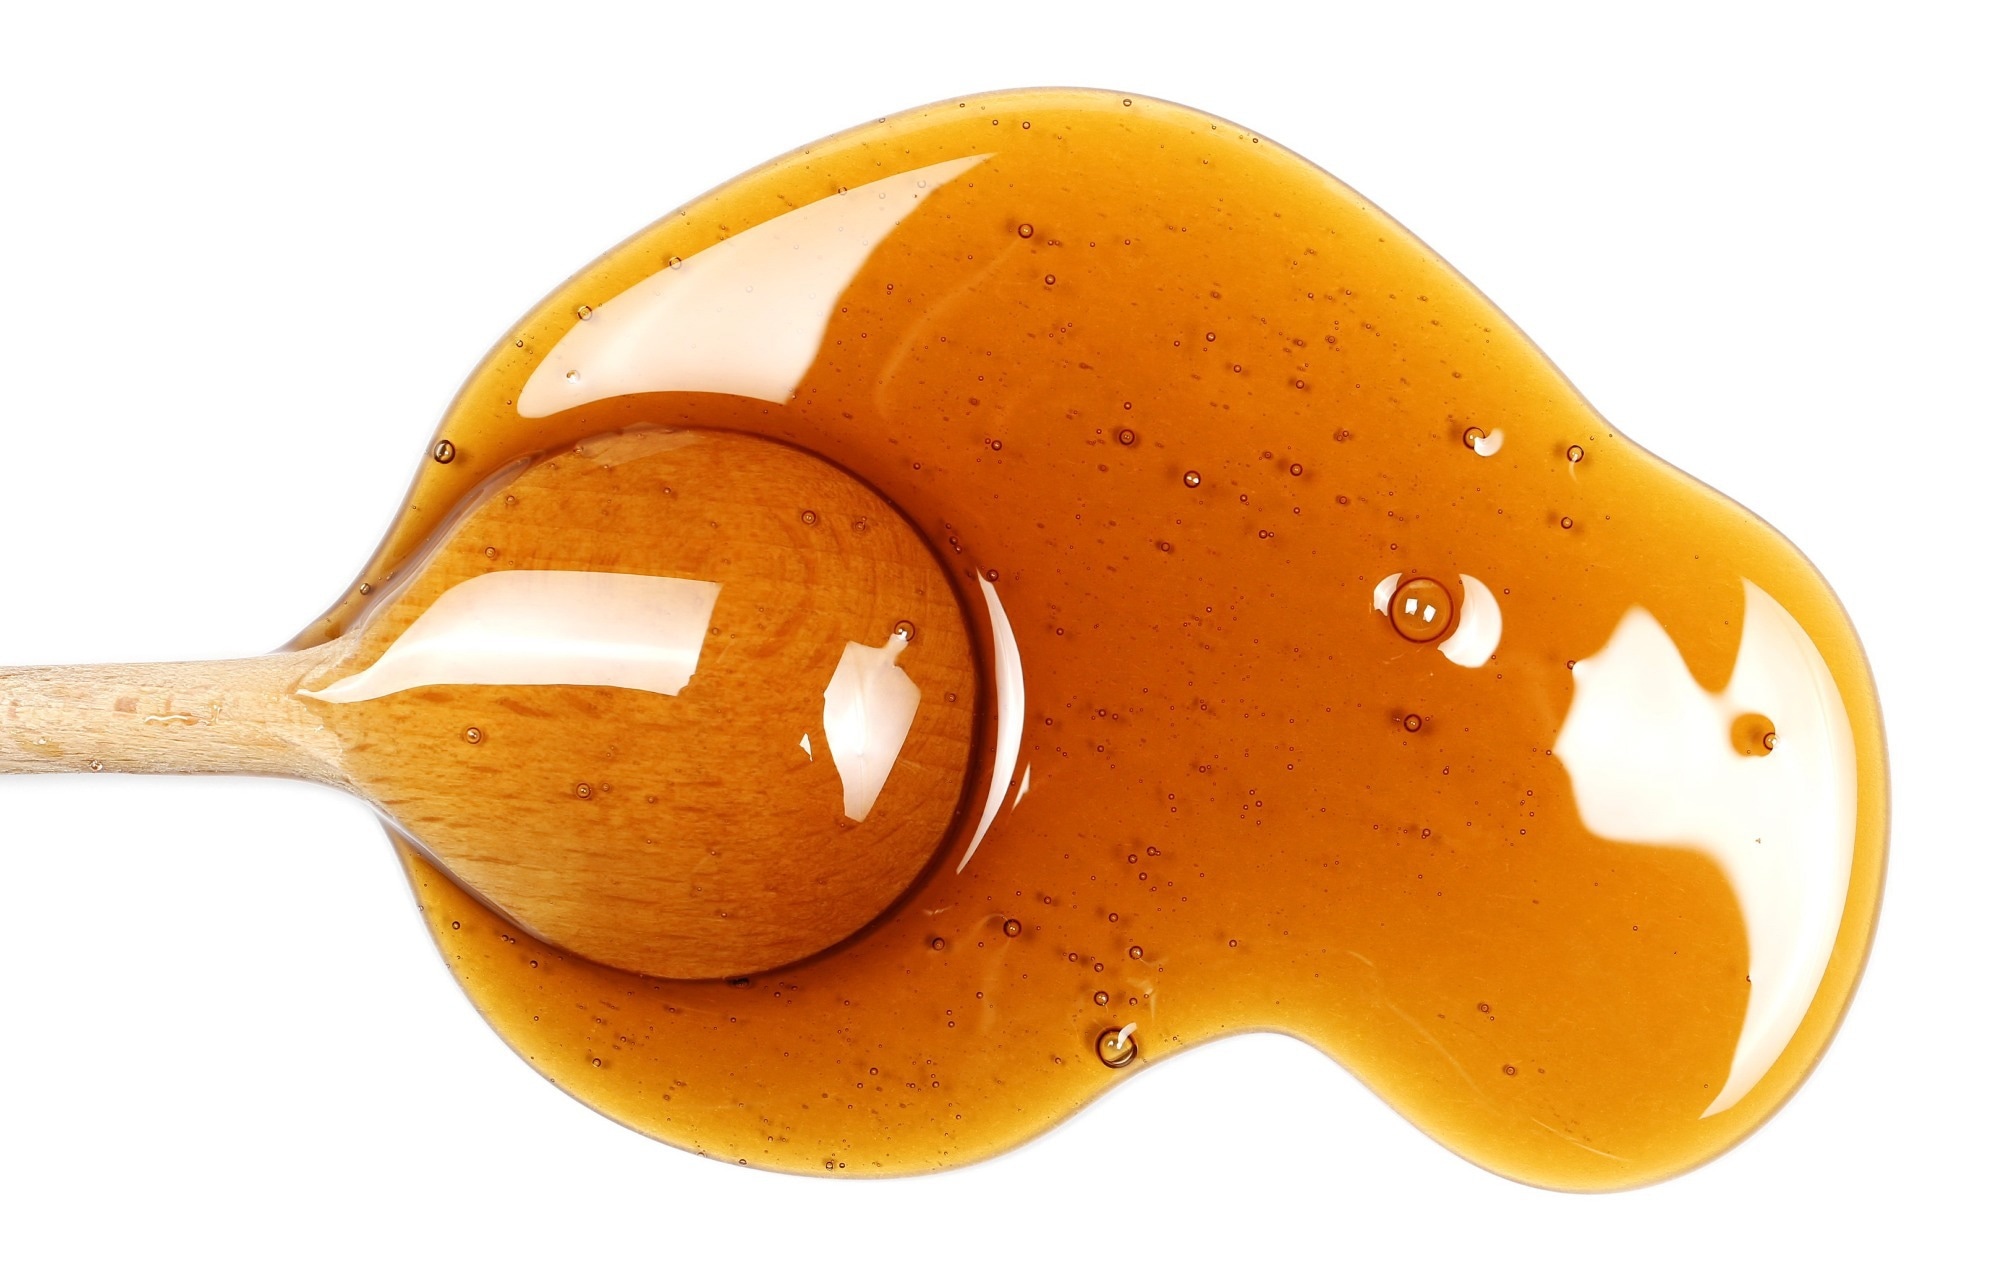 Nutritional, pharmacological, and sensory properties of maple syrup: A comprehensive review. ​​​​​​​Image Credit: xpixel / Shutterstock